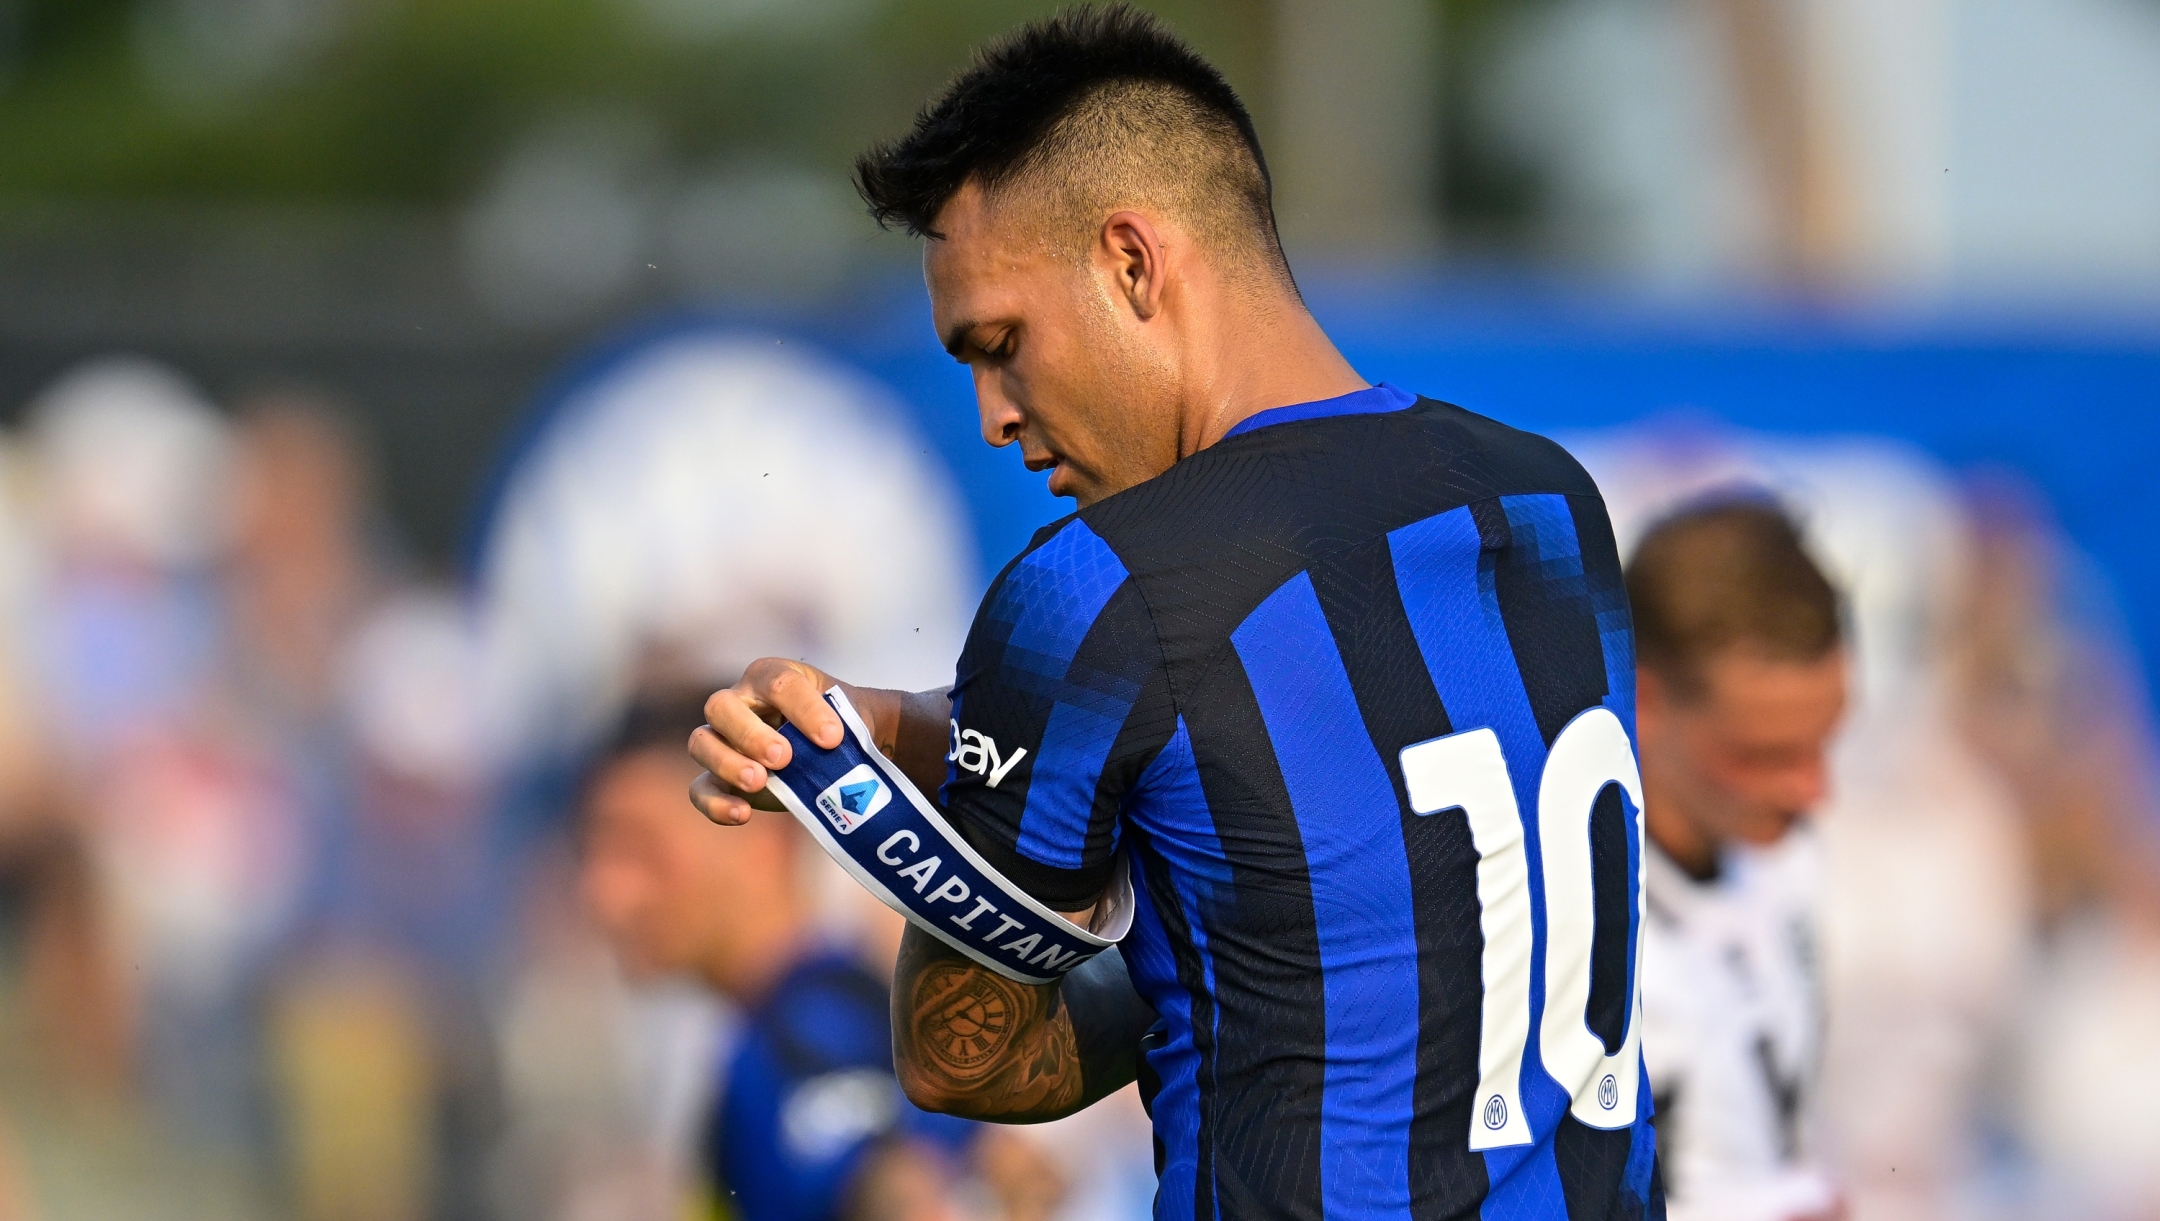 COMO, ITALY - JULY 18: Lautaro Martinez of FC Internazionale during the friendly match between FC Internazionale Milano and Lugano FC at Appiano Gentile on July 18, 2023 in Como, Italy. (Photo by Mattia Ozbot - Inter/Inter via Getty Images)